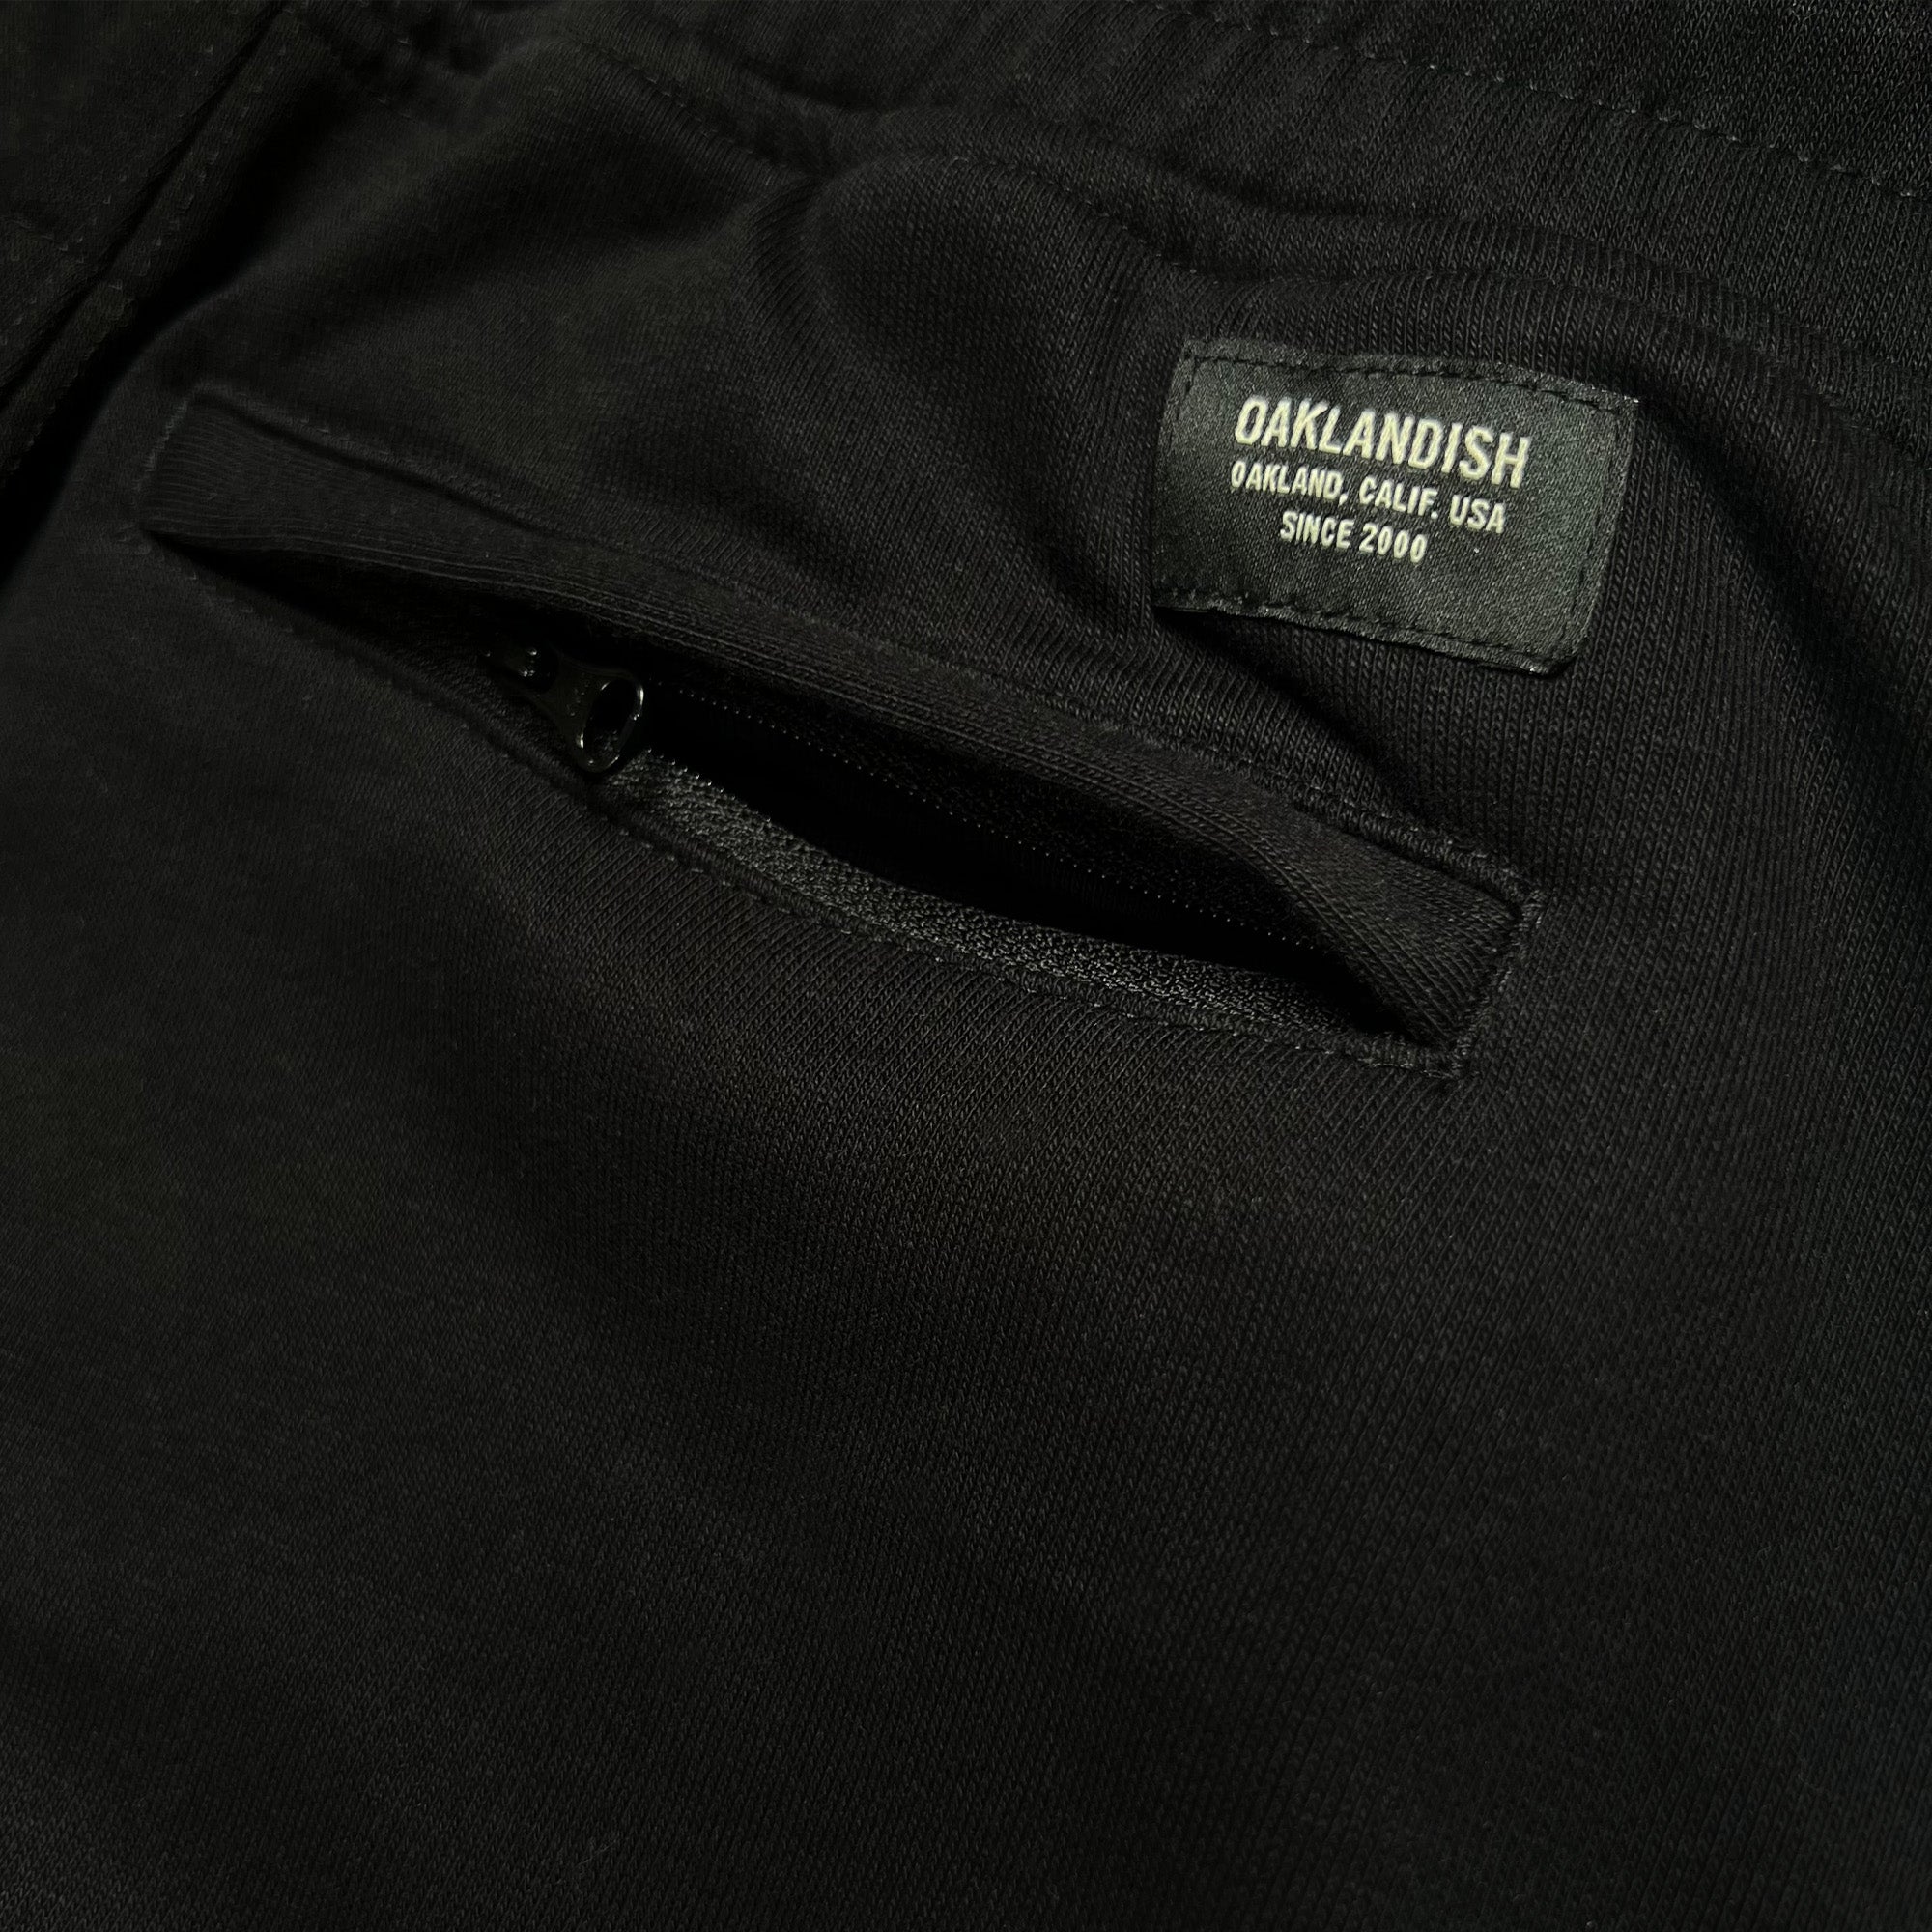 Detail close-up of the Oaklandish label above the back zipper pocket of black joggers.